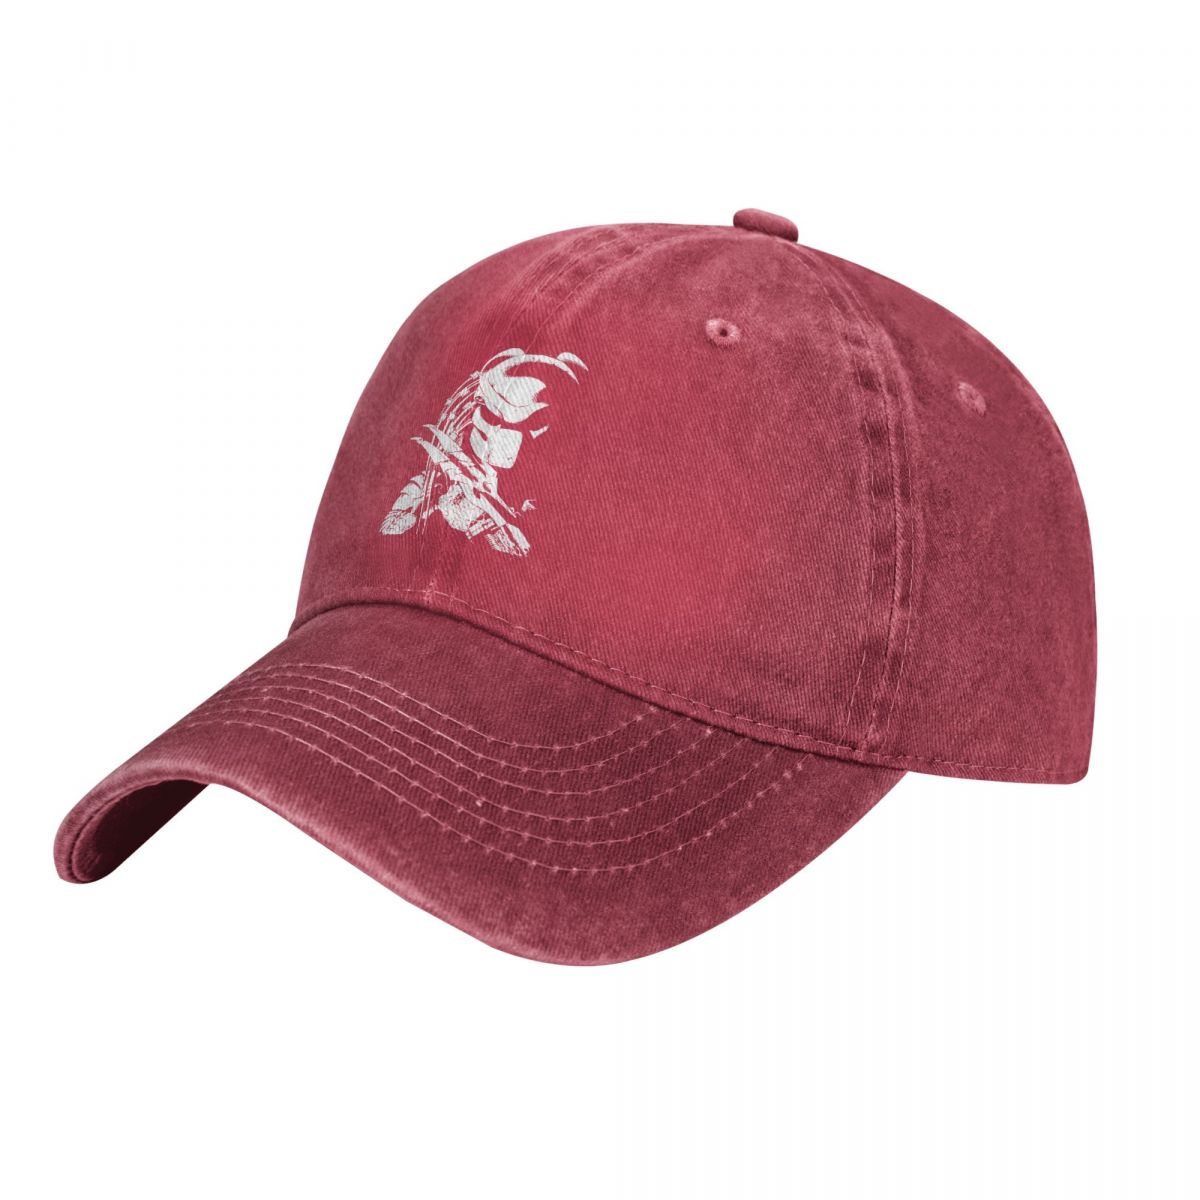 Predator - You Know It's Going Down - Snapback Baseball Cap - Summer Hat For Men and Women-Red-One Size-